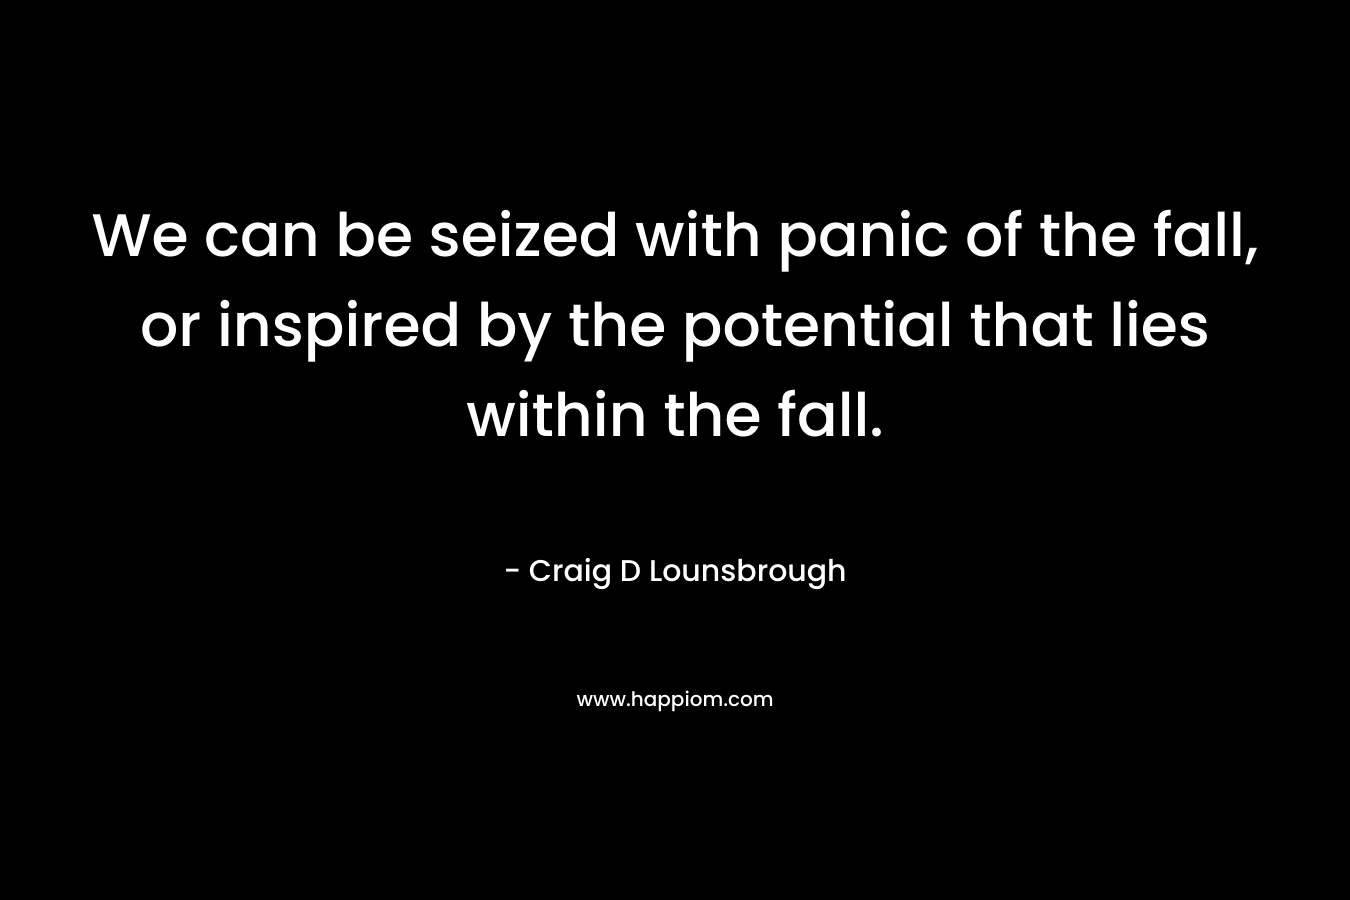 We can be seized with panic of the fall, or inspired by the potential that lies within the fall.